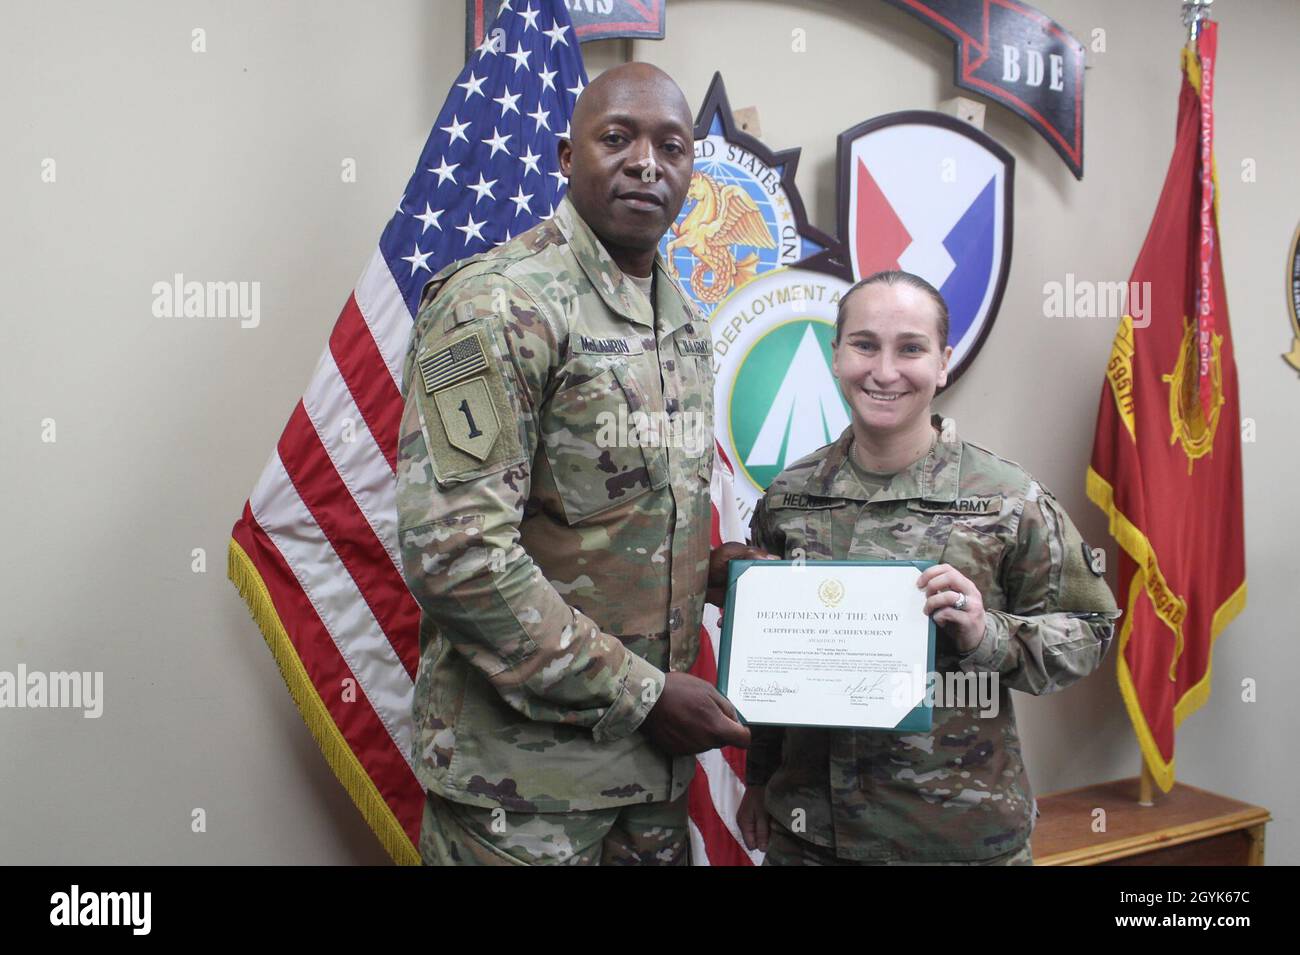 Sgt. Ahslee S. Heckler, 840th Transportation Battalion, was recognized as the Desert Knight of the month by Col. Mondrey O. McLaurin, commander, 595th Transportation Brigade, during a ceremony where she received the Army Certificate of Achievement at Camp Arifjan, Kuwait, Jan. 14, 2020. (U.S. Army photo by Claudia LaMantia) Stock Photo